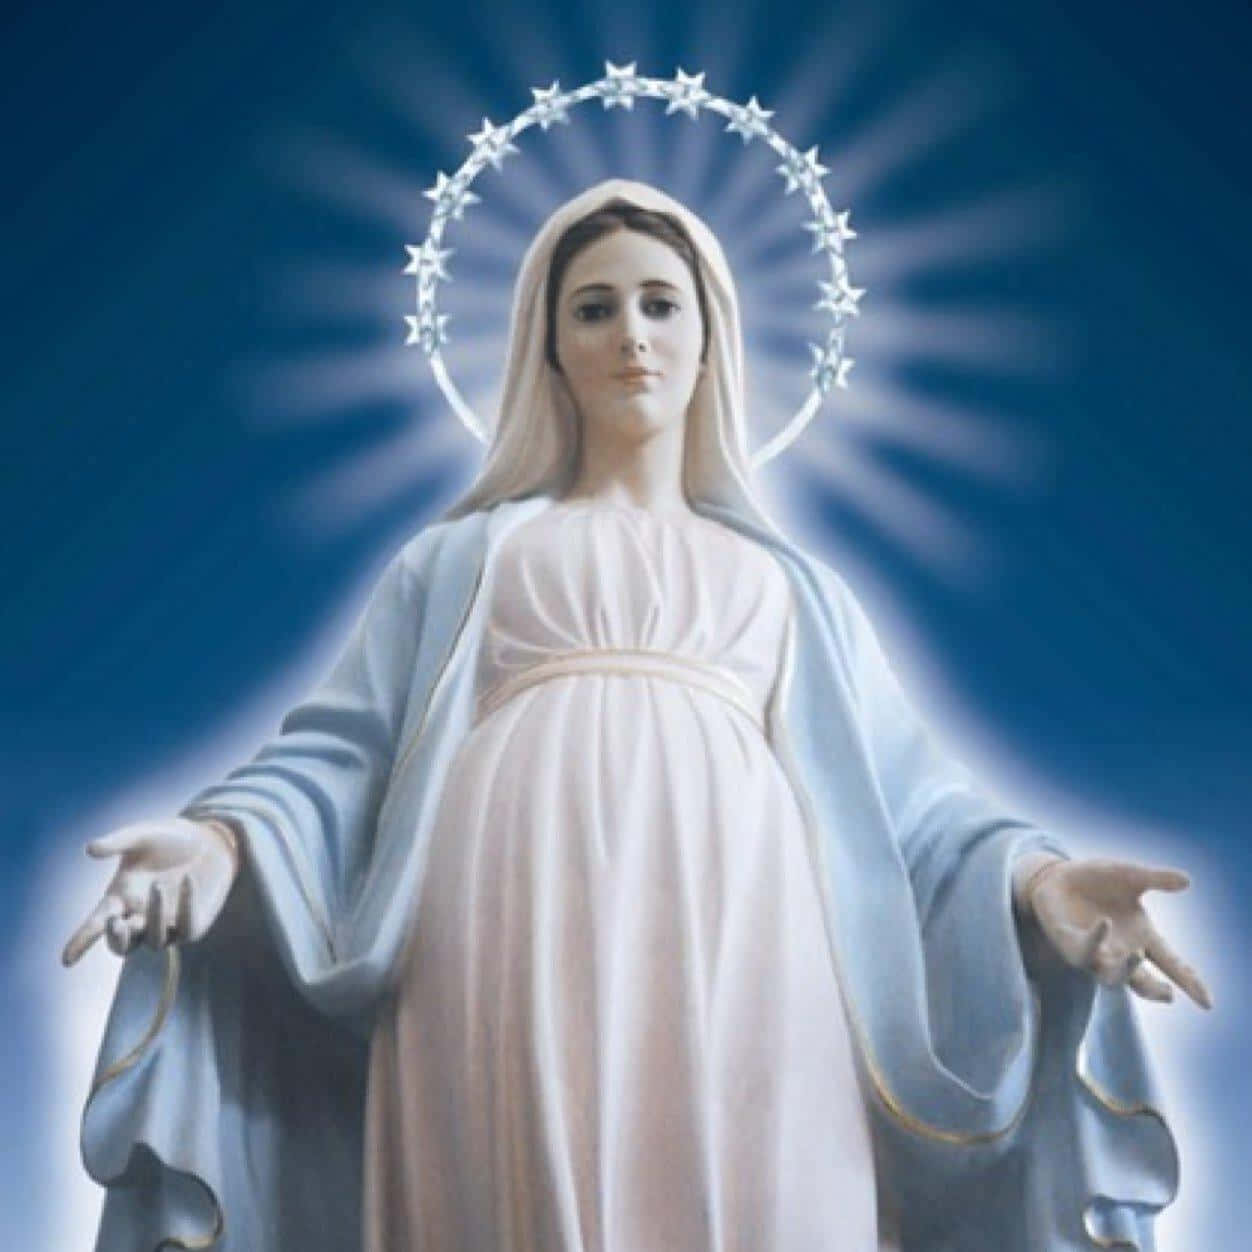 Download Mother Mary - A Pillar of Strength Wallpaper | Wallpapers.com